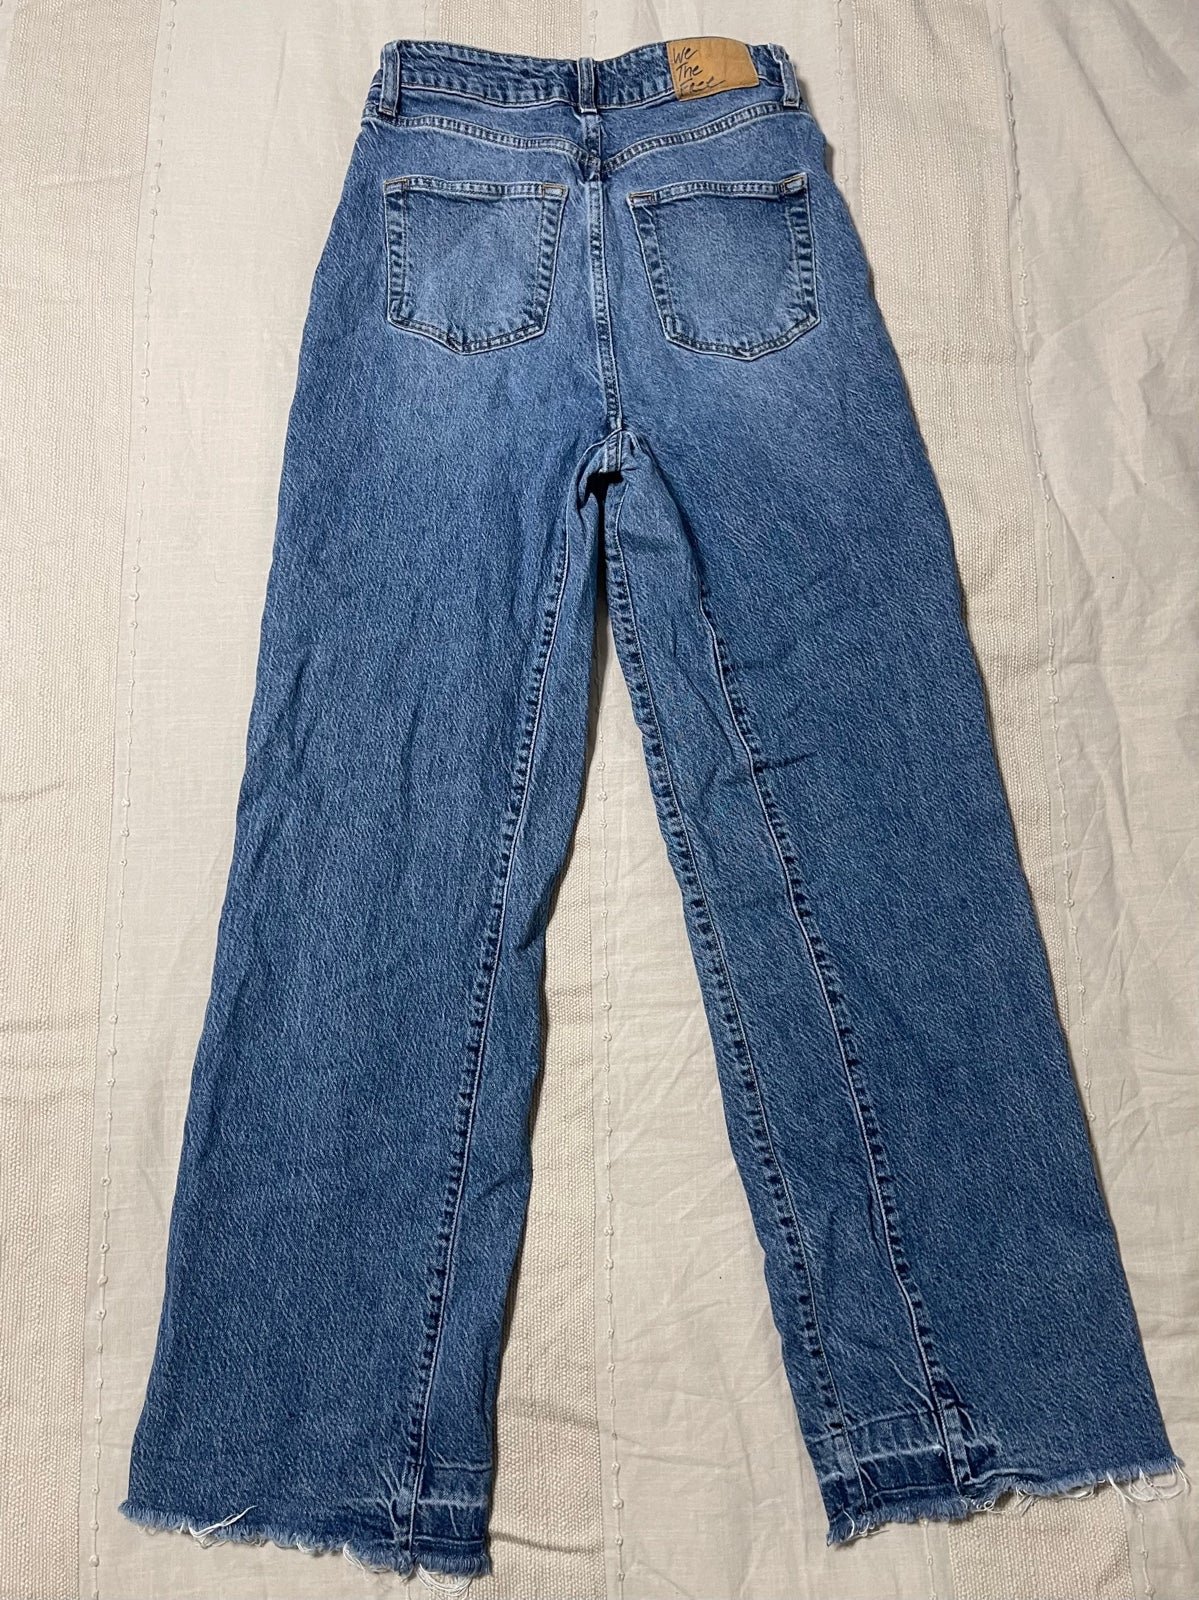 floor price Free People wide leg jeans JT2nFuzK7 just for you